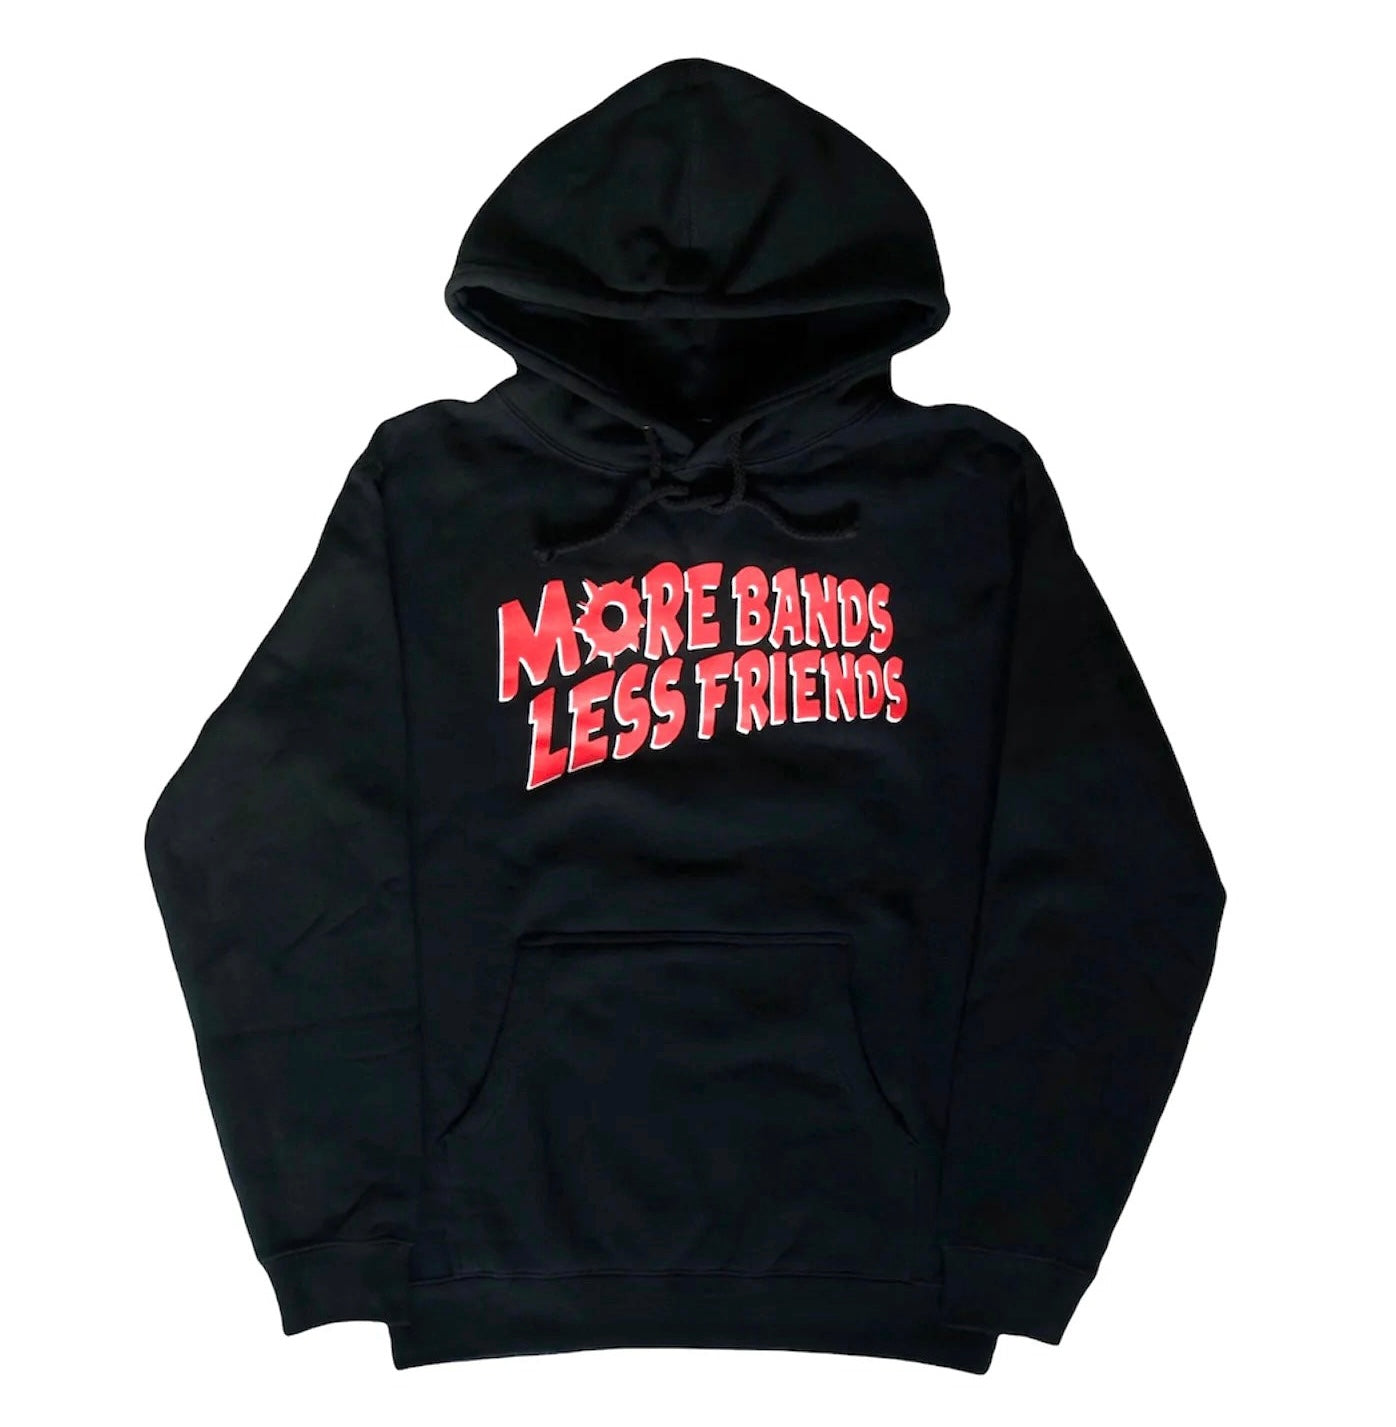 Black "More Bands Less Friends" Hoodie